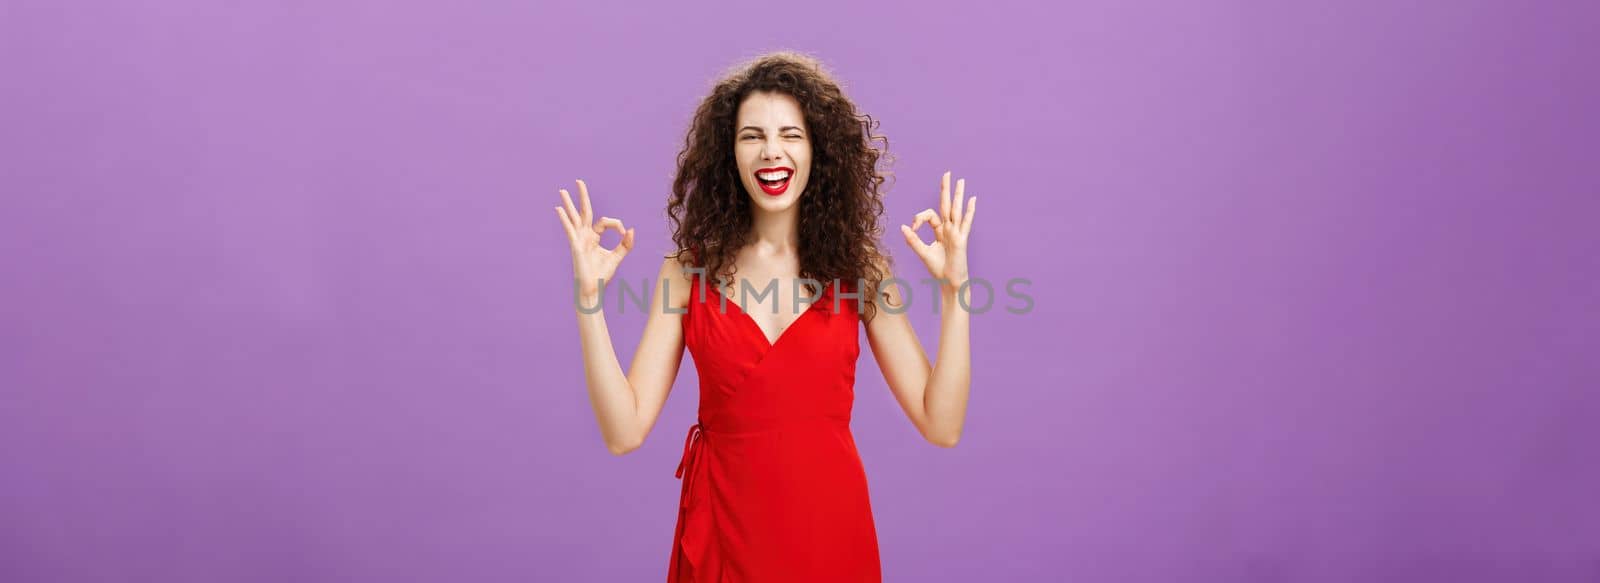 Happy elegant woman hosting party. being assured everything be fine showing okay or excellent gesture with fingers winking and smiling joyfully standing in evening red dress wearing luxurious makeup.